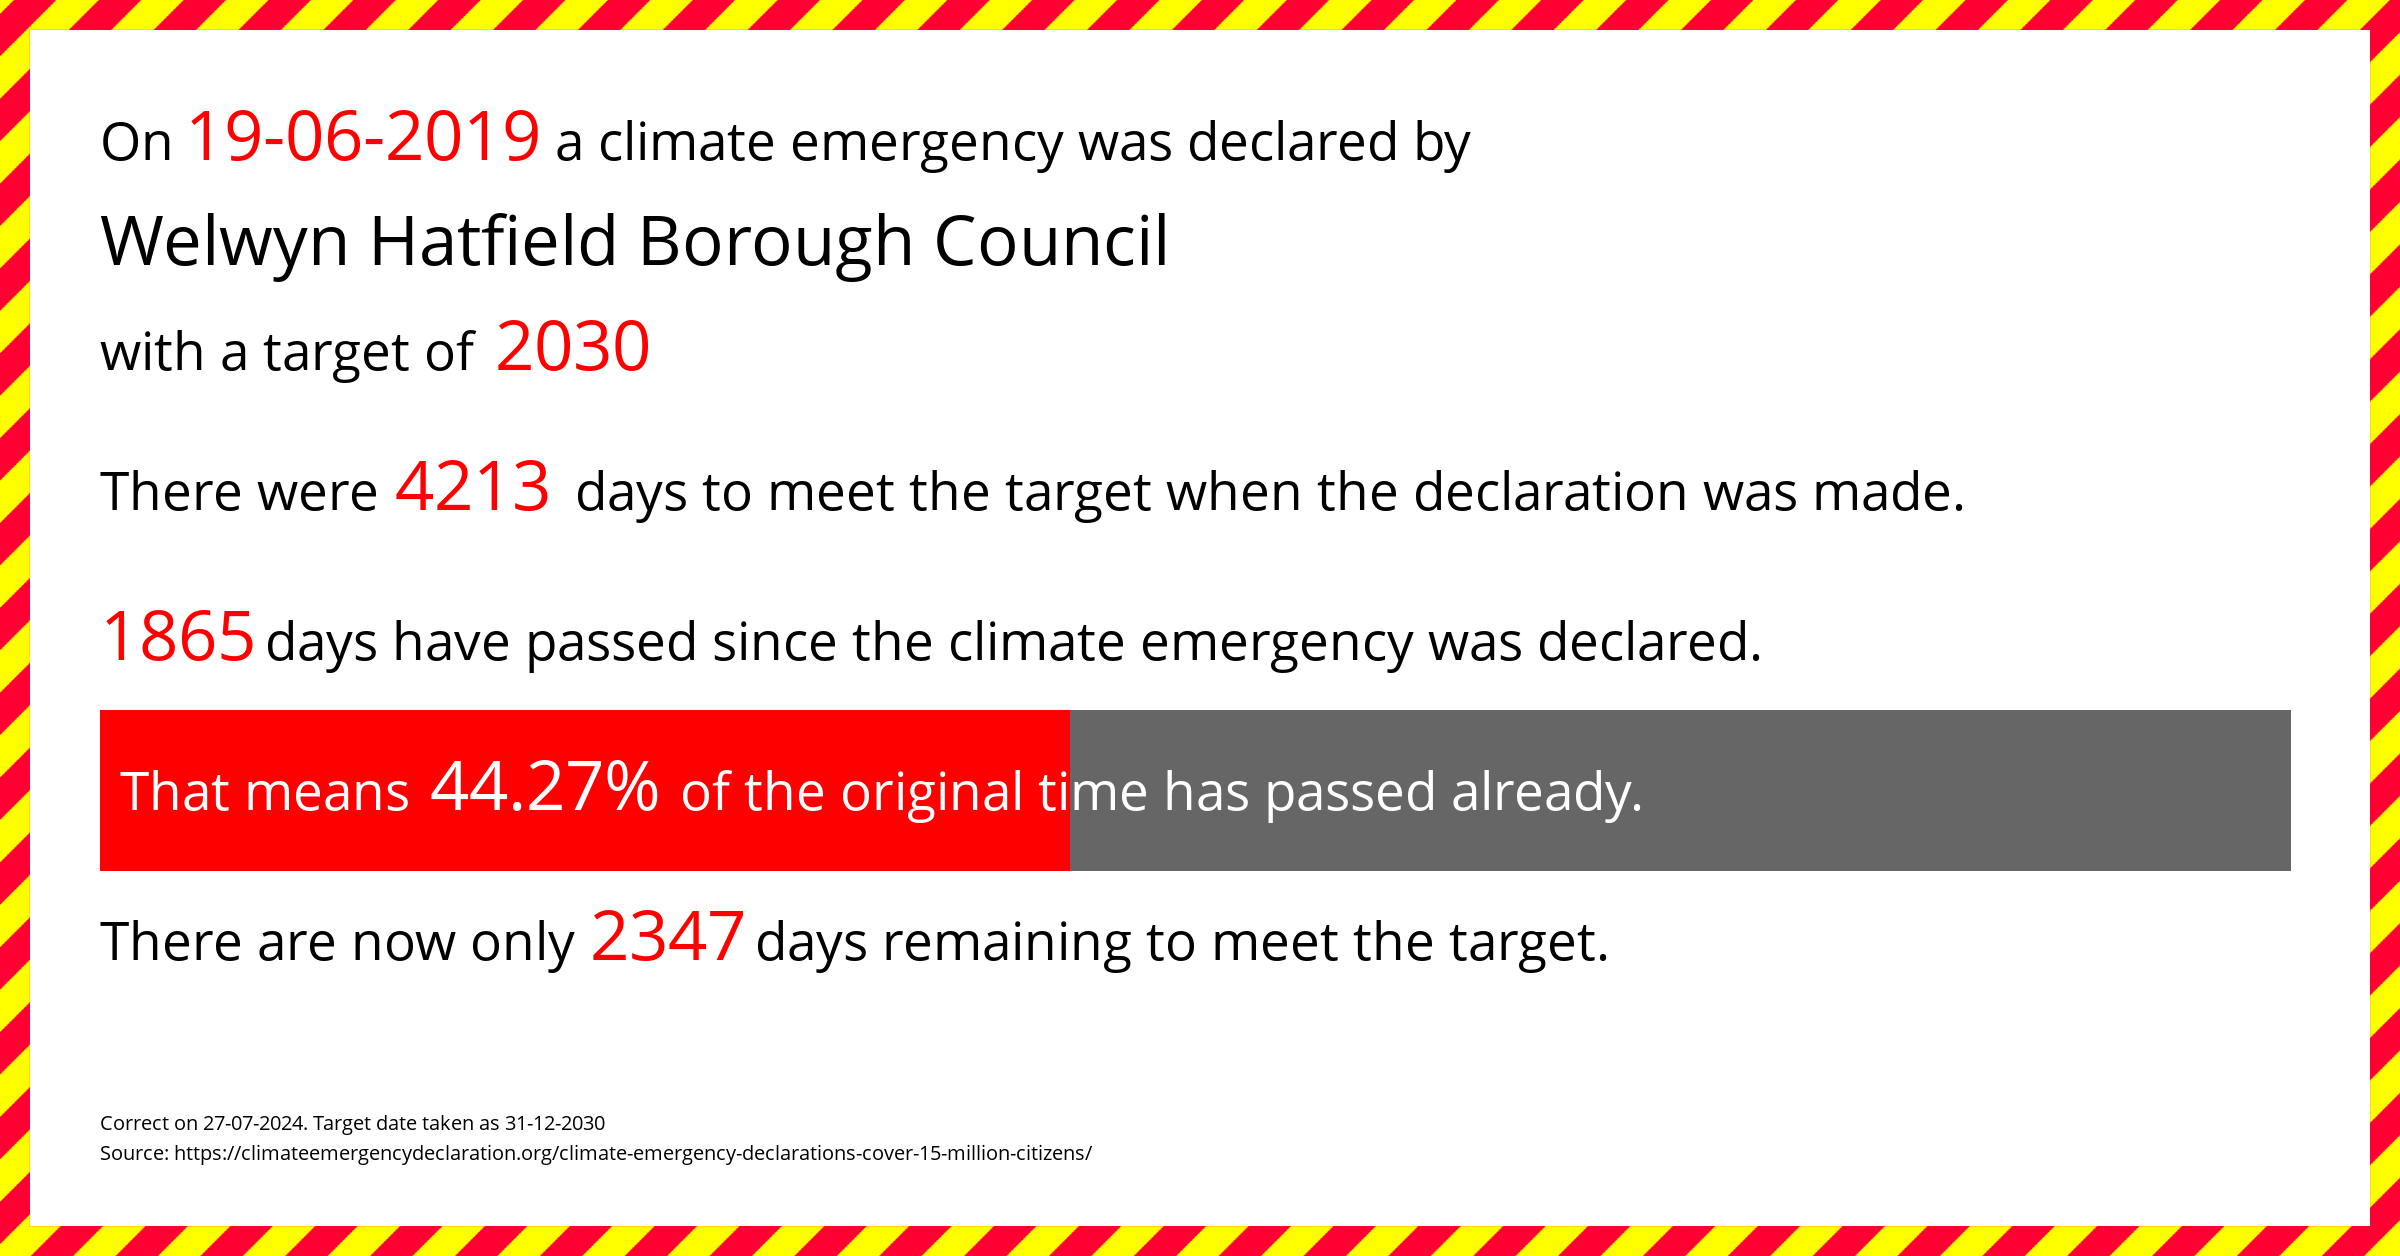 Welwyn Hatfield Borough Council declared a Climate emergency on Wednesday 19th June 2019, with a target of 2030.